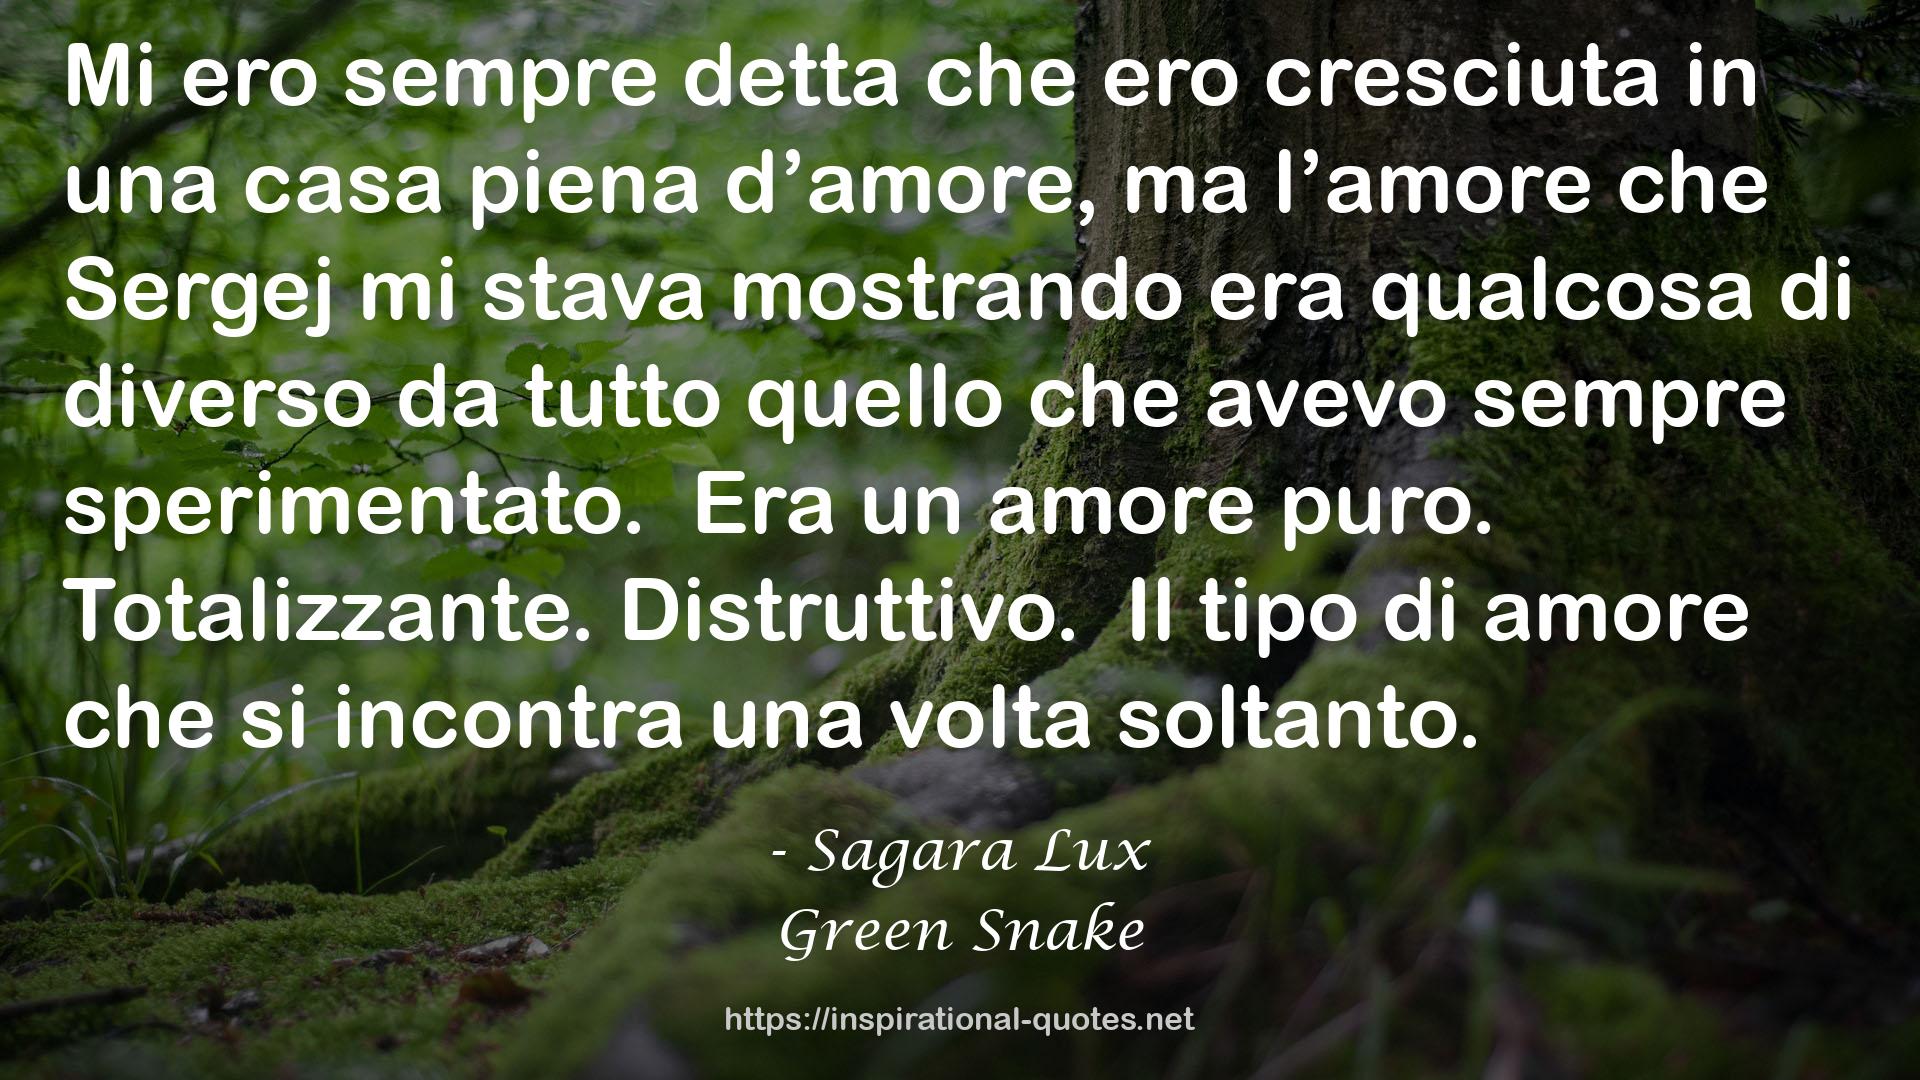 Green Snake QUOTES